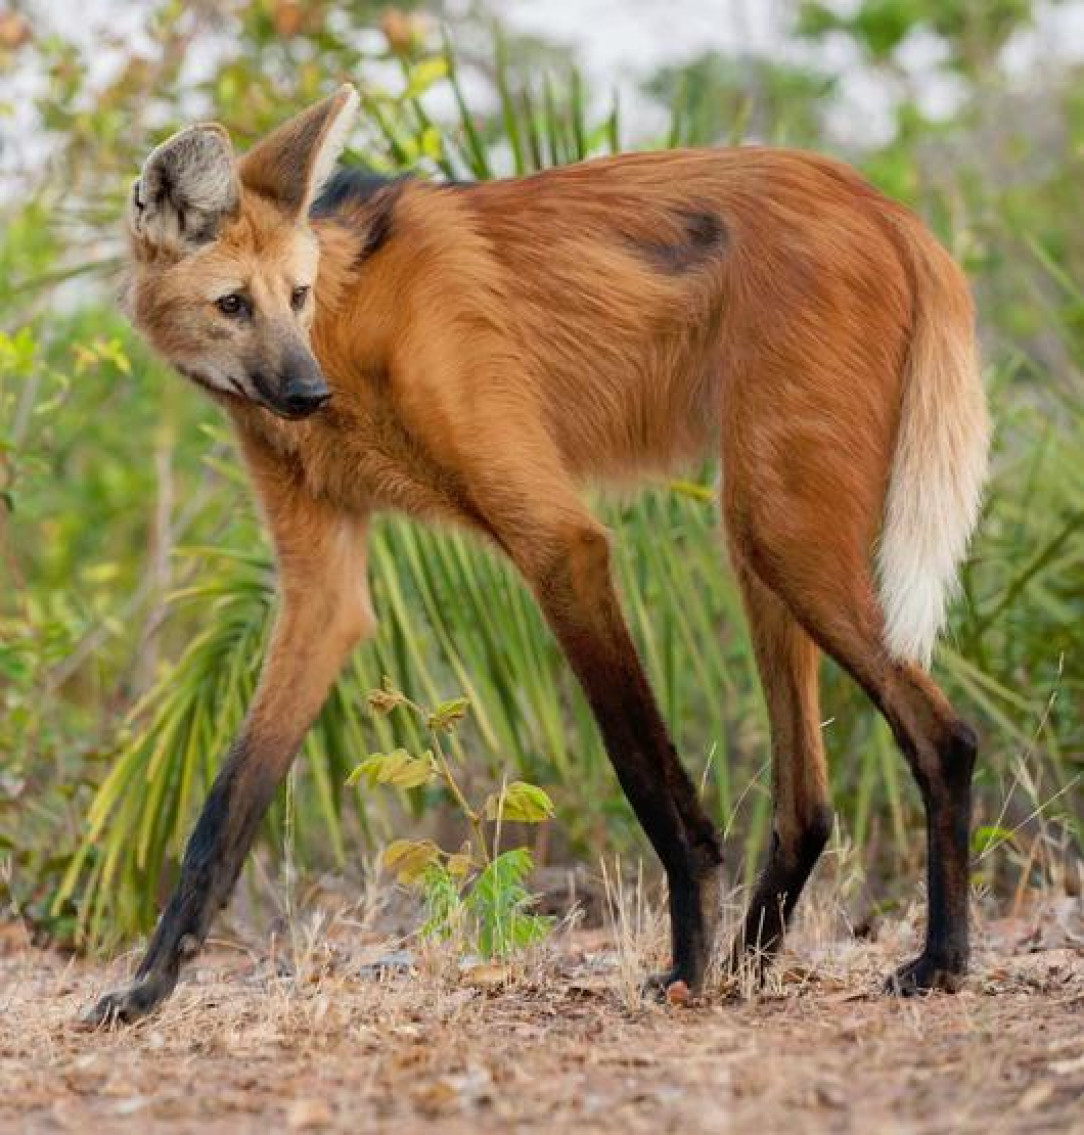 This is a Maned Fox that looks like a crossbreed of a fox and deer